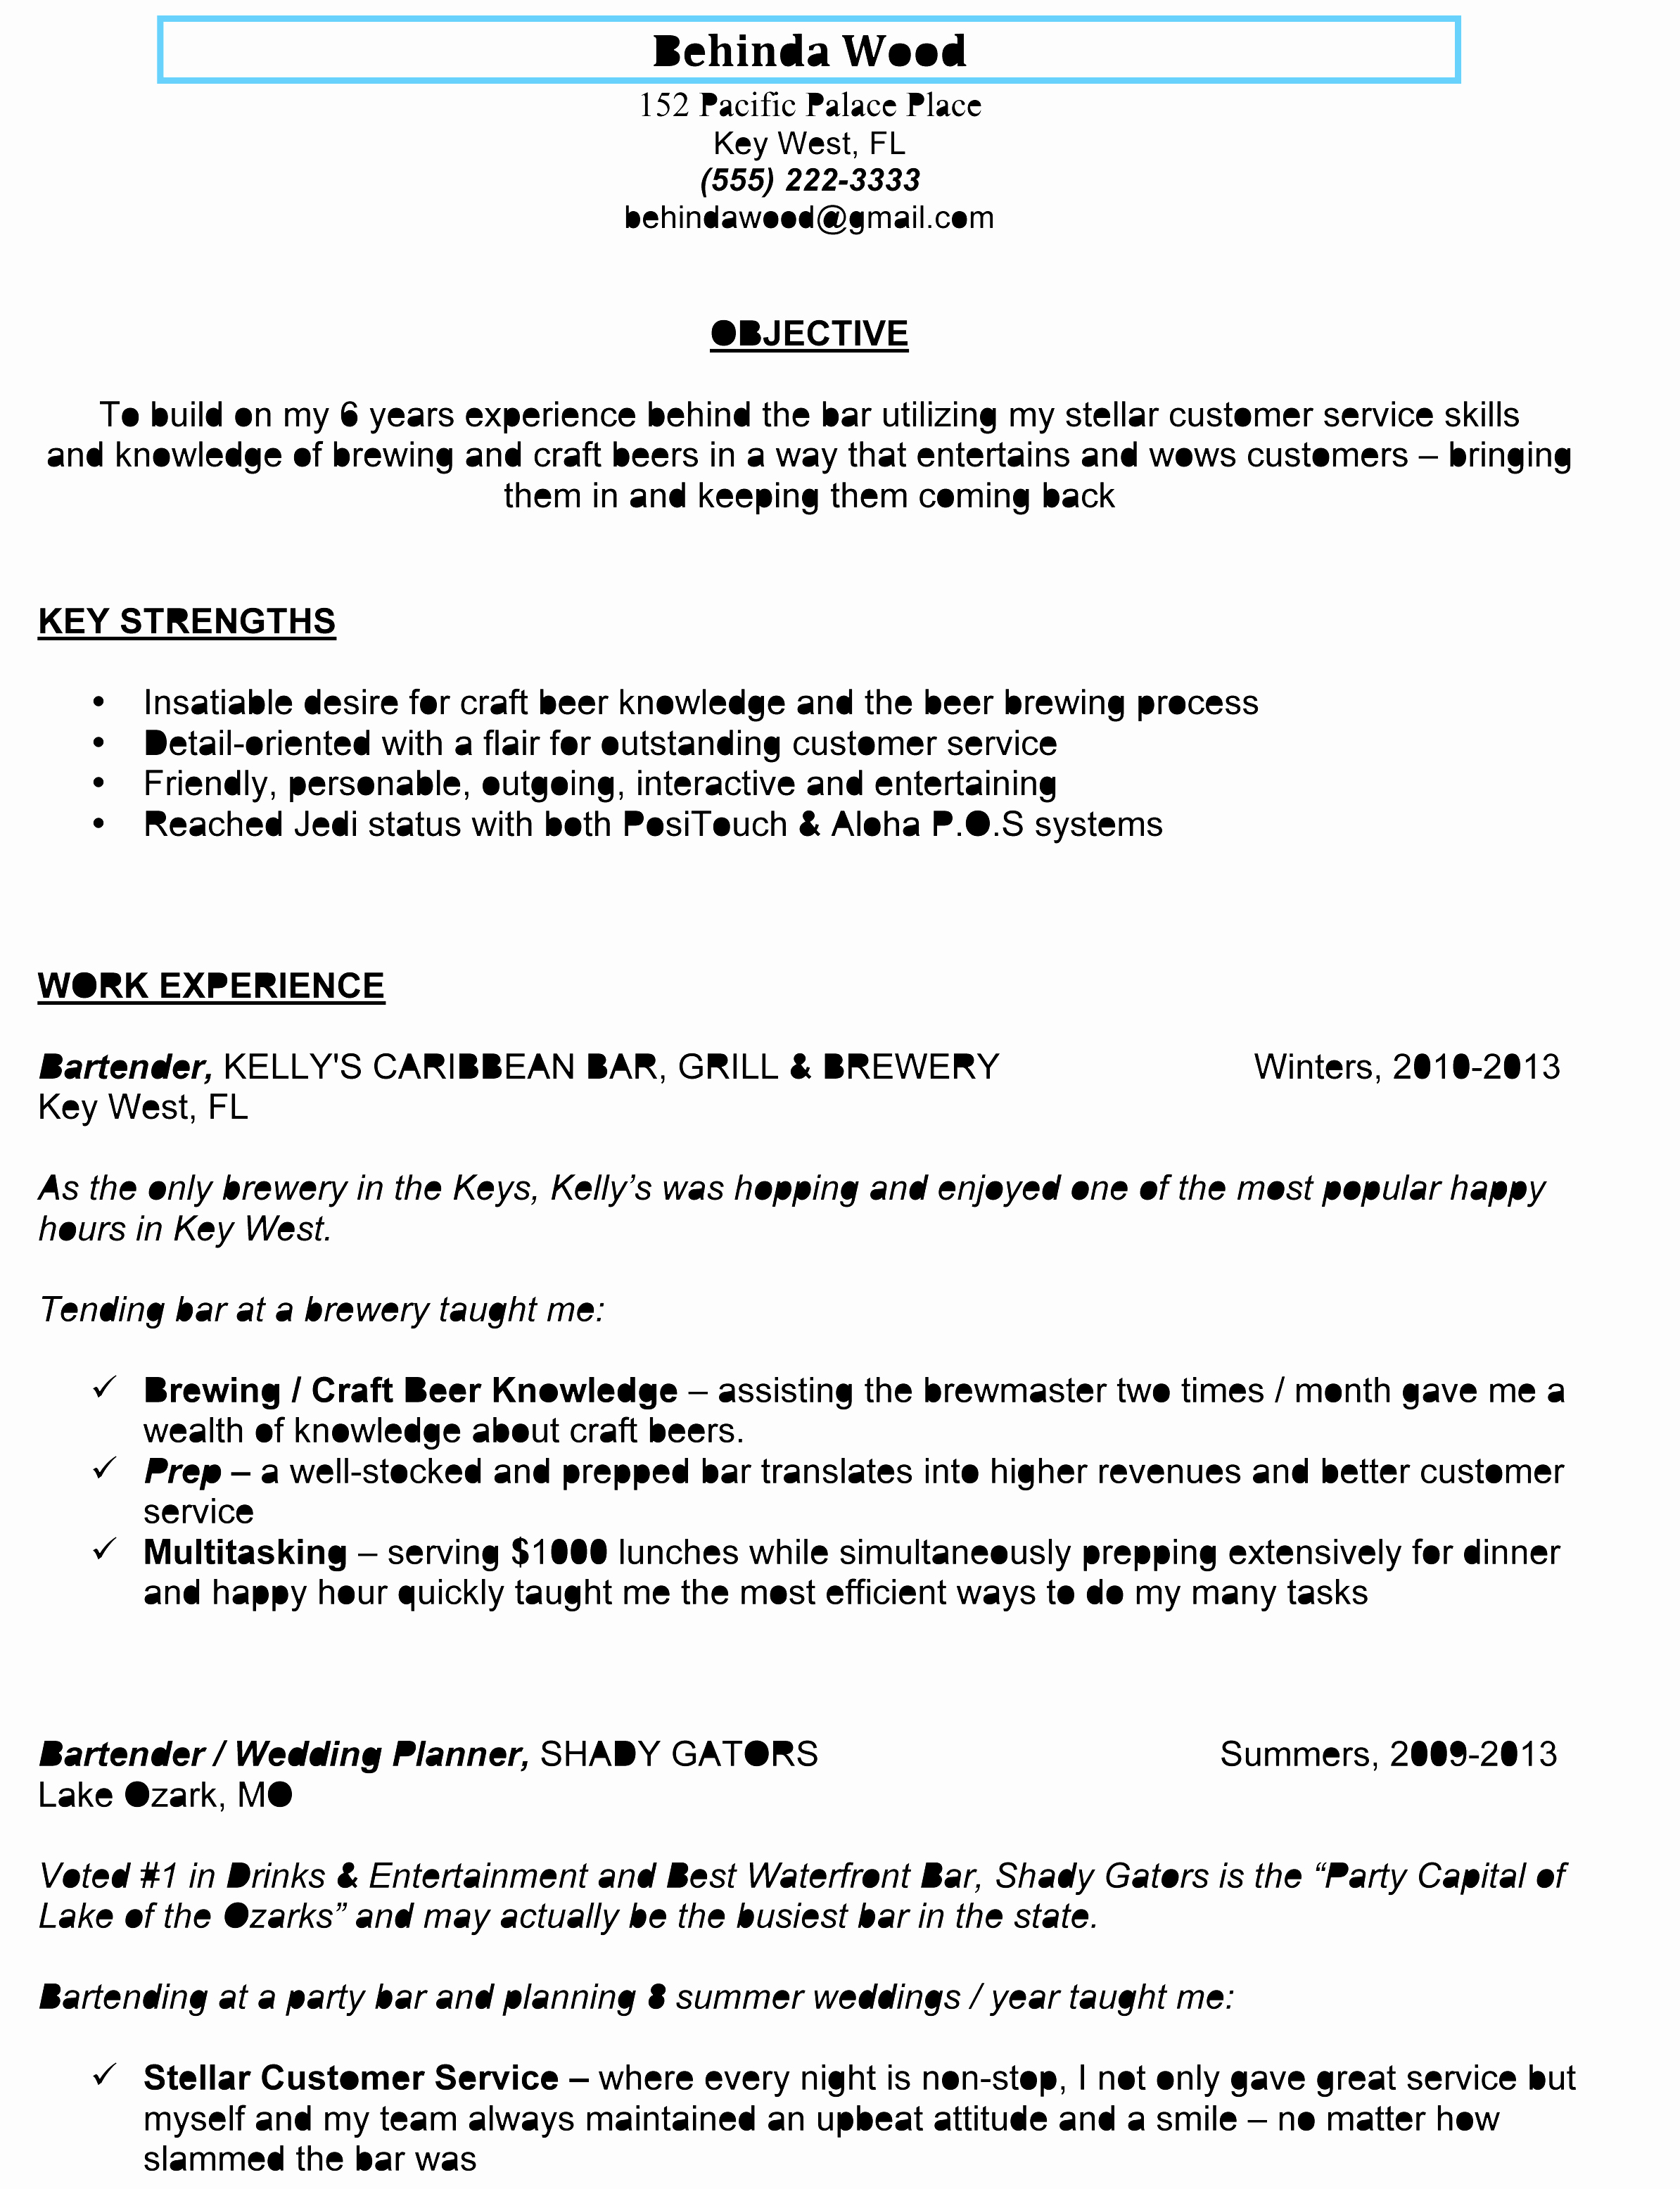 Awesome Sample Bartender Resume to Use as Template